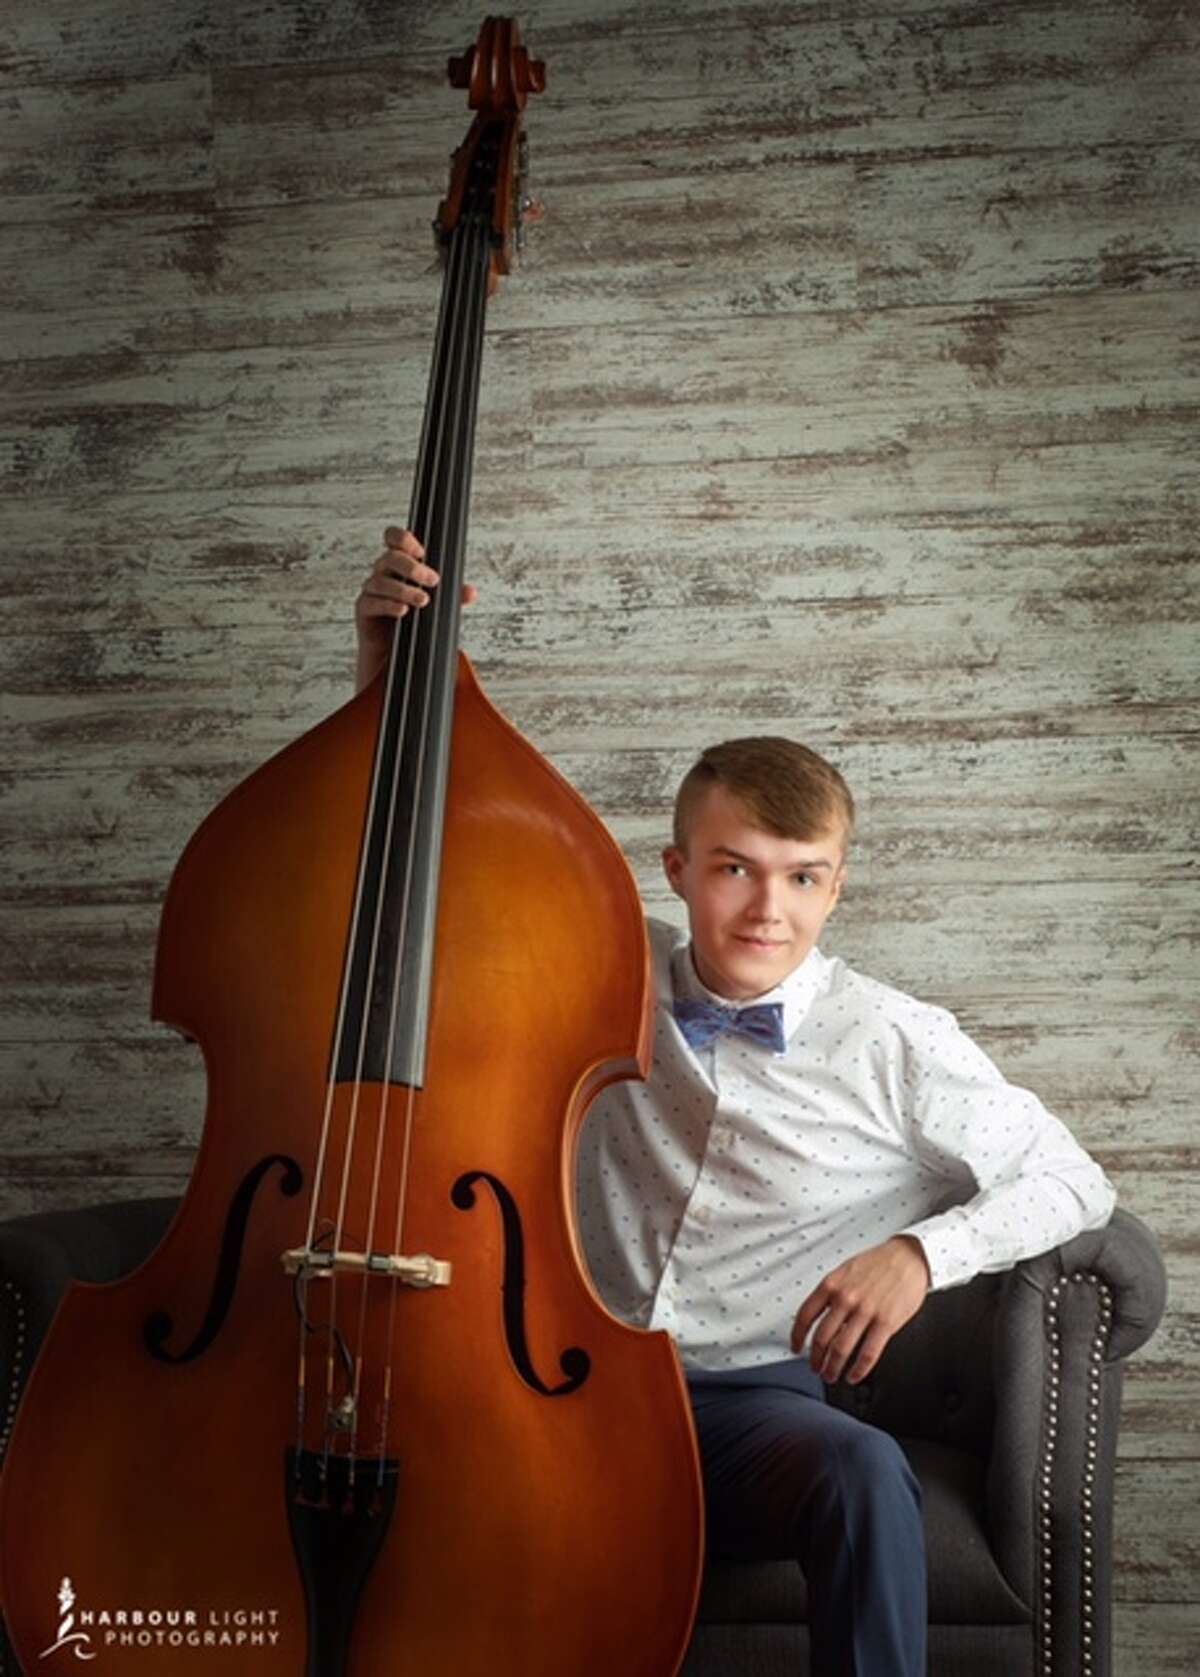 Aiden Shephard is pictured with his acoustic bass.